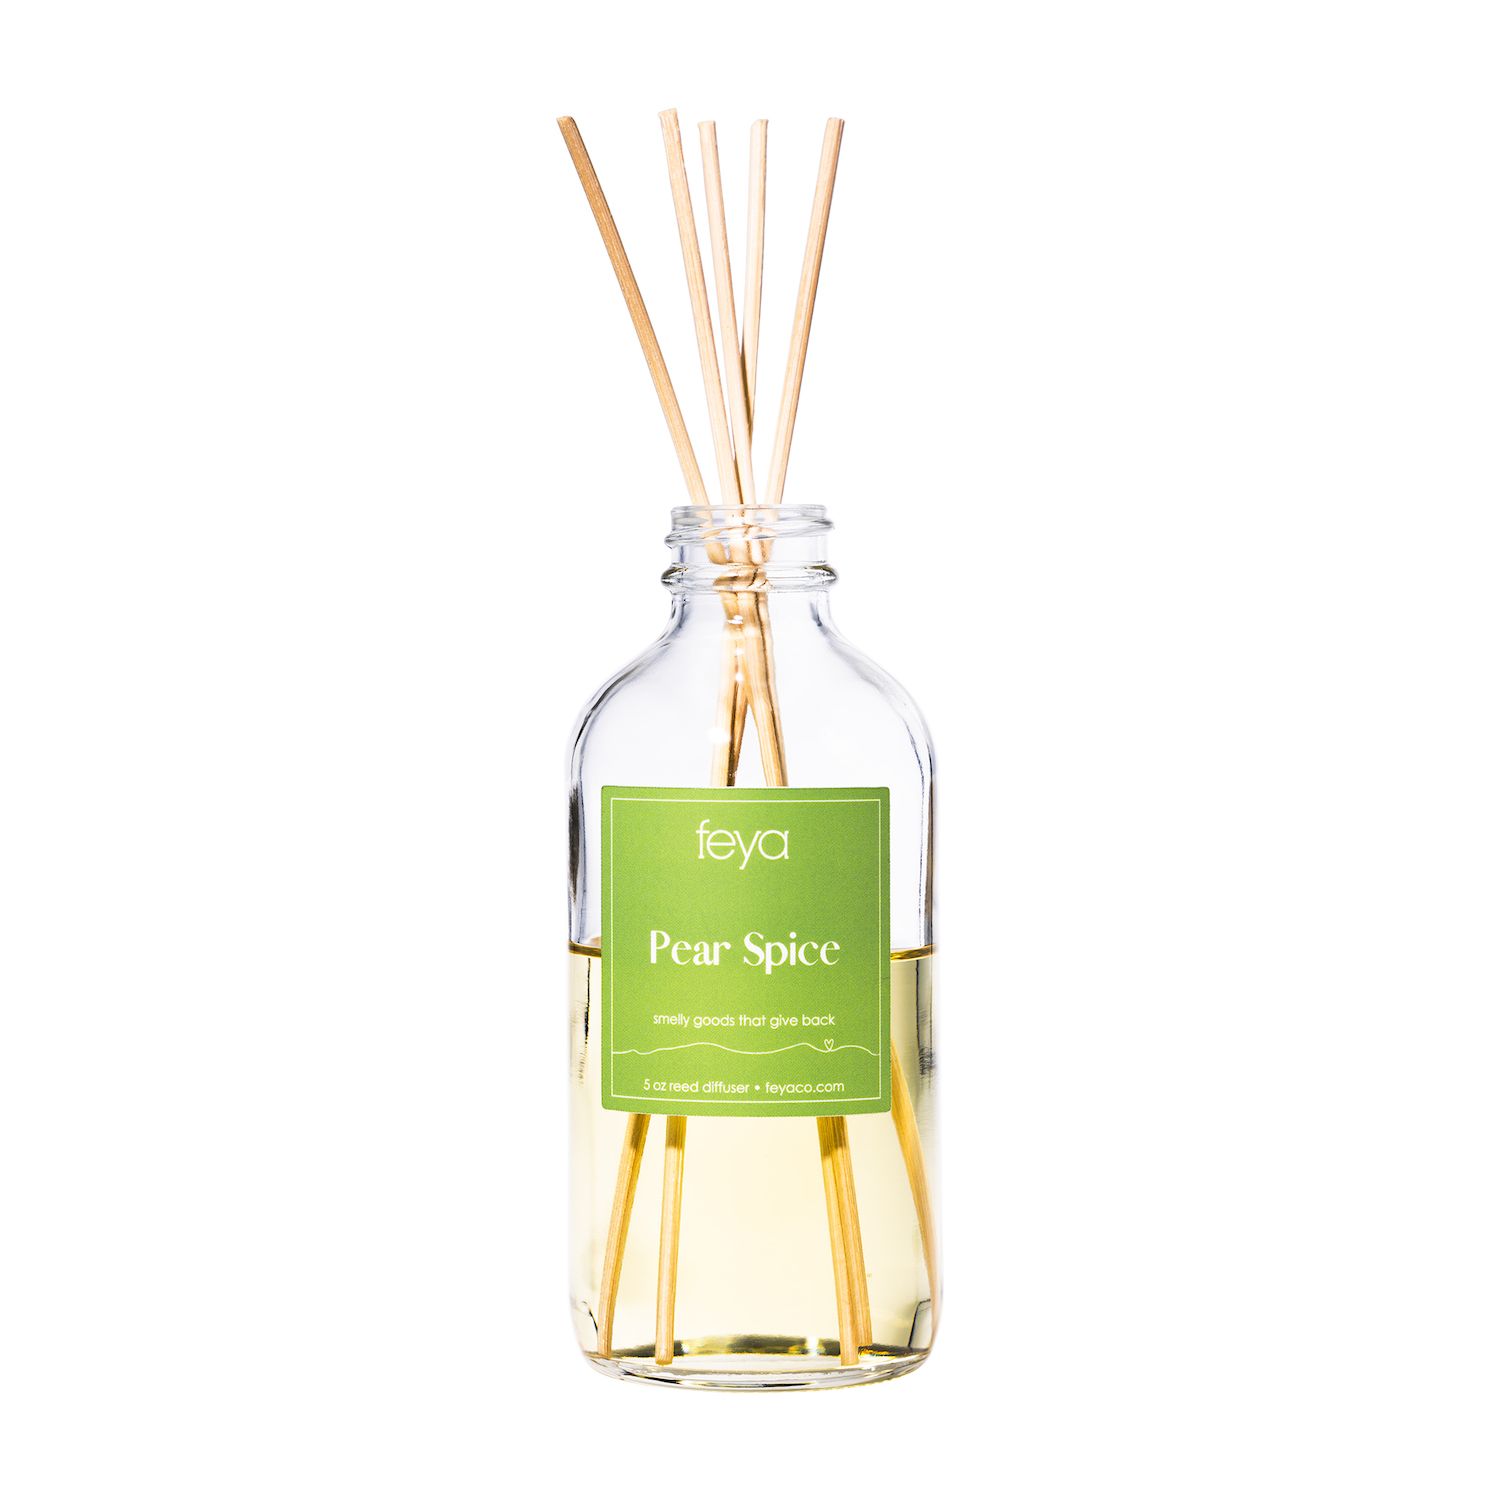 PURSONIC 3D Wooden Tree Reed Diffuser with Lavender Essential Oil